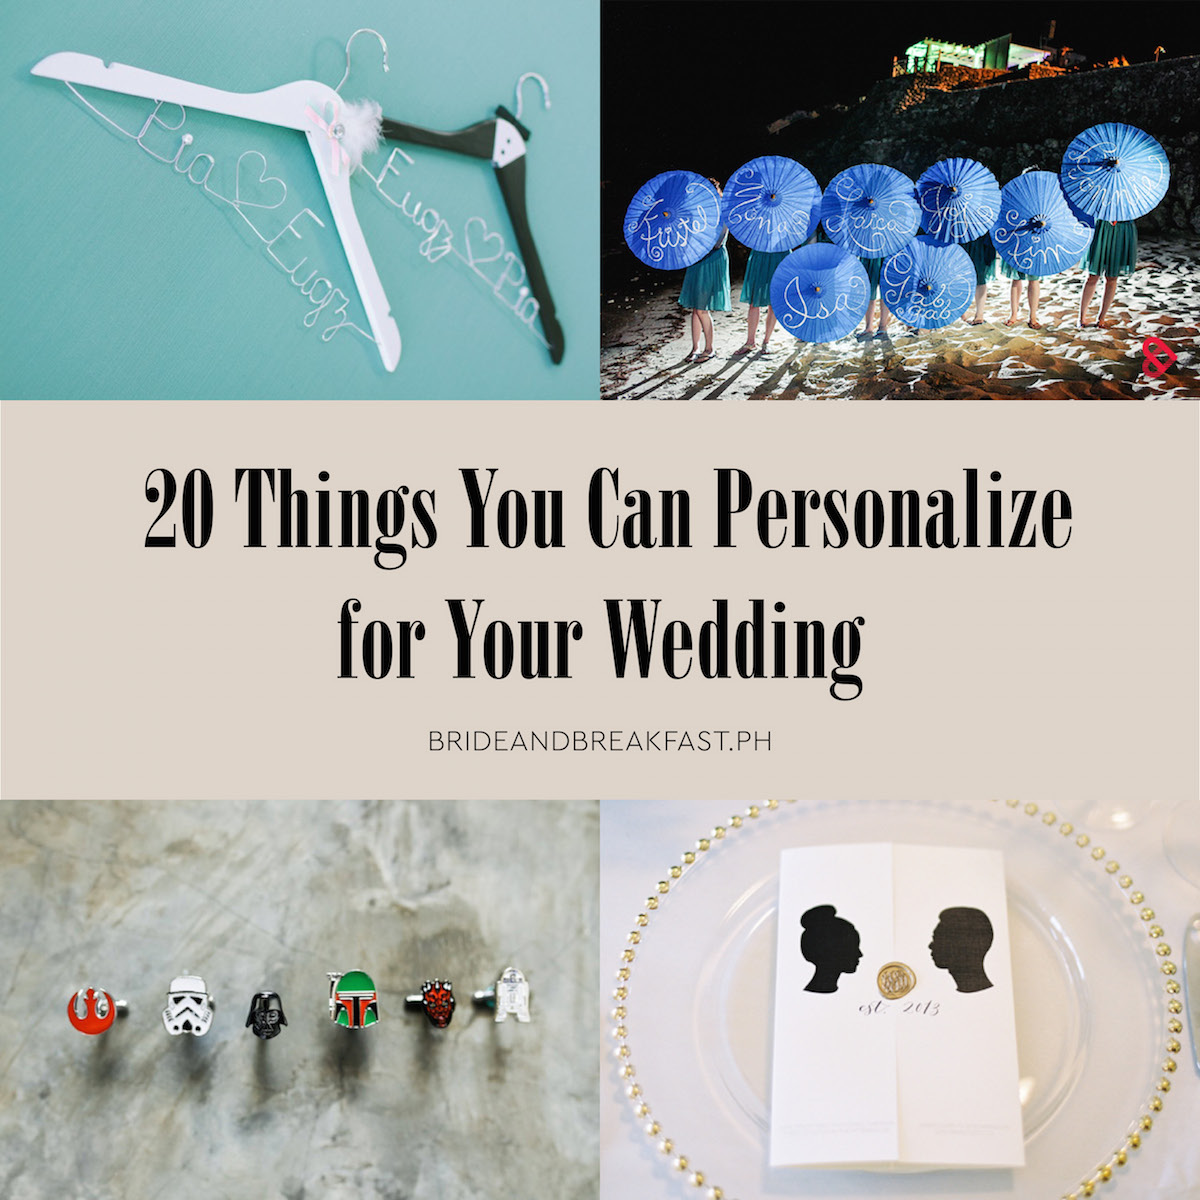 20 Things You Can Personalize for Your Wedding